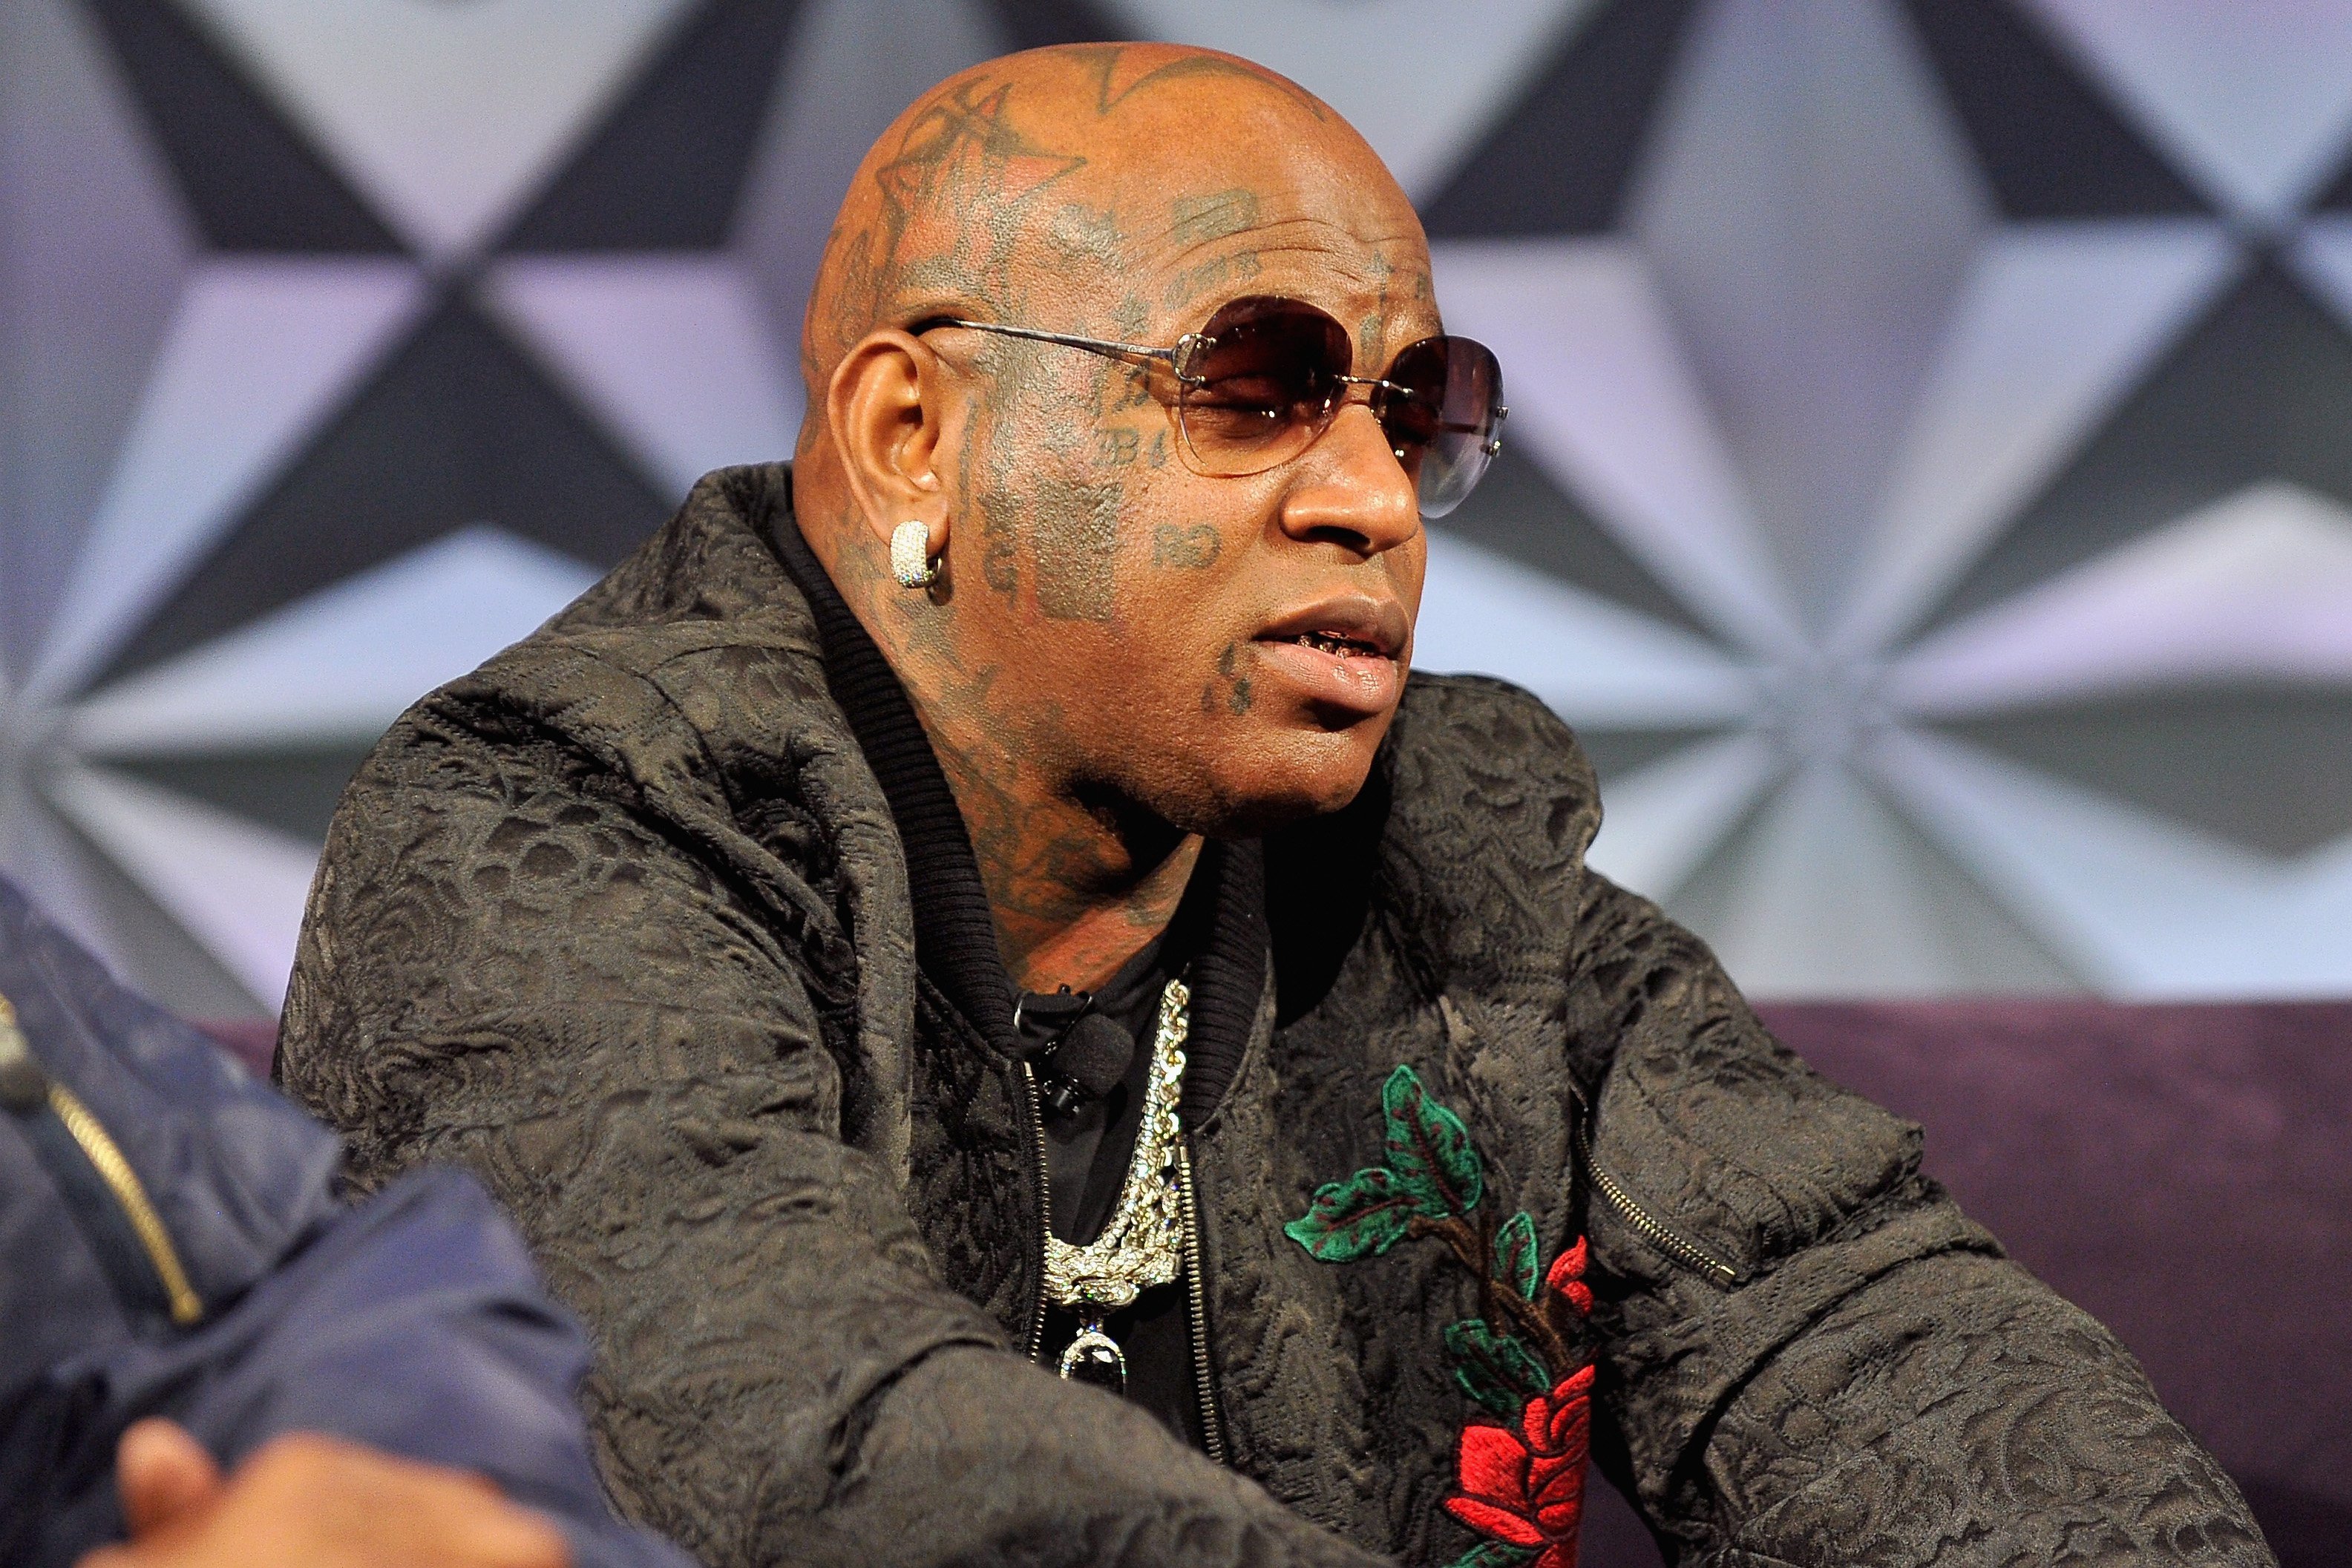 Birdman speaks during the Genius Talks sponsored by AT&T during the 2016 BET Experience on June 25, 2016 in California | Photo: Getty Images